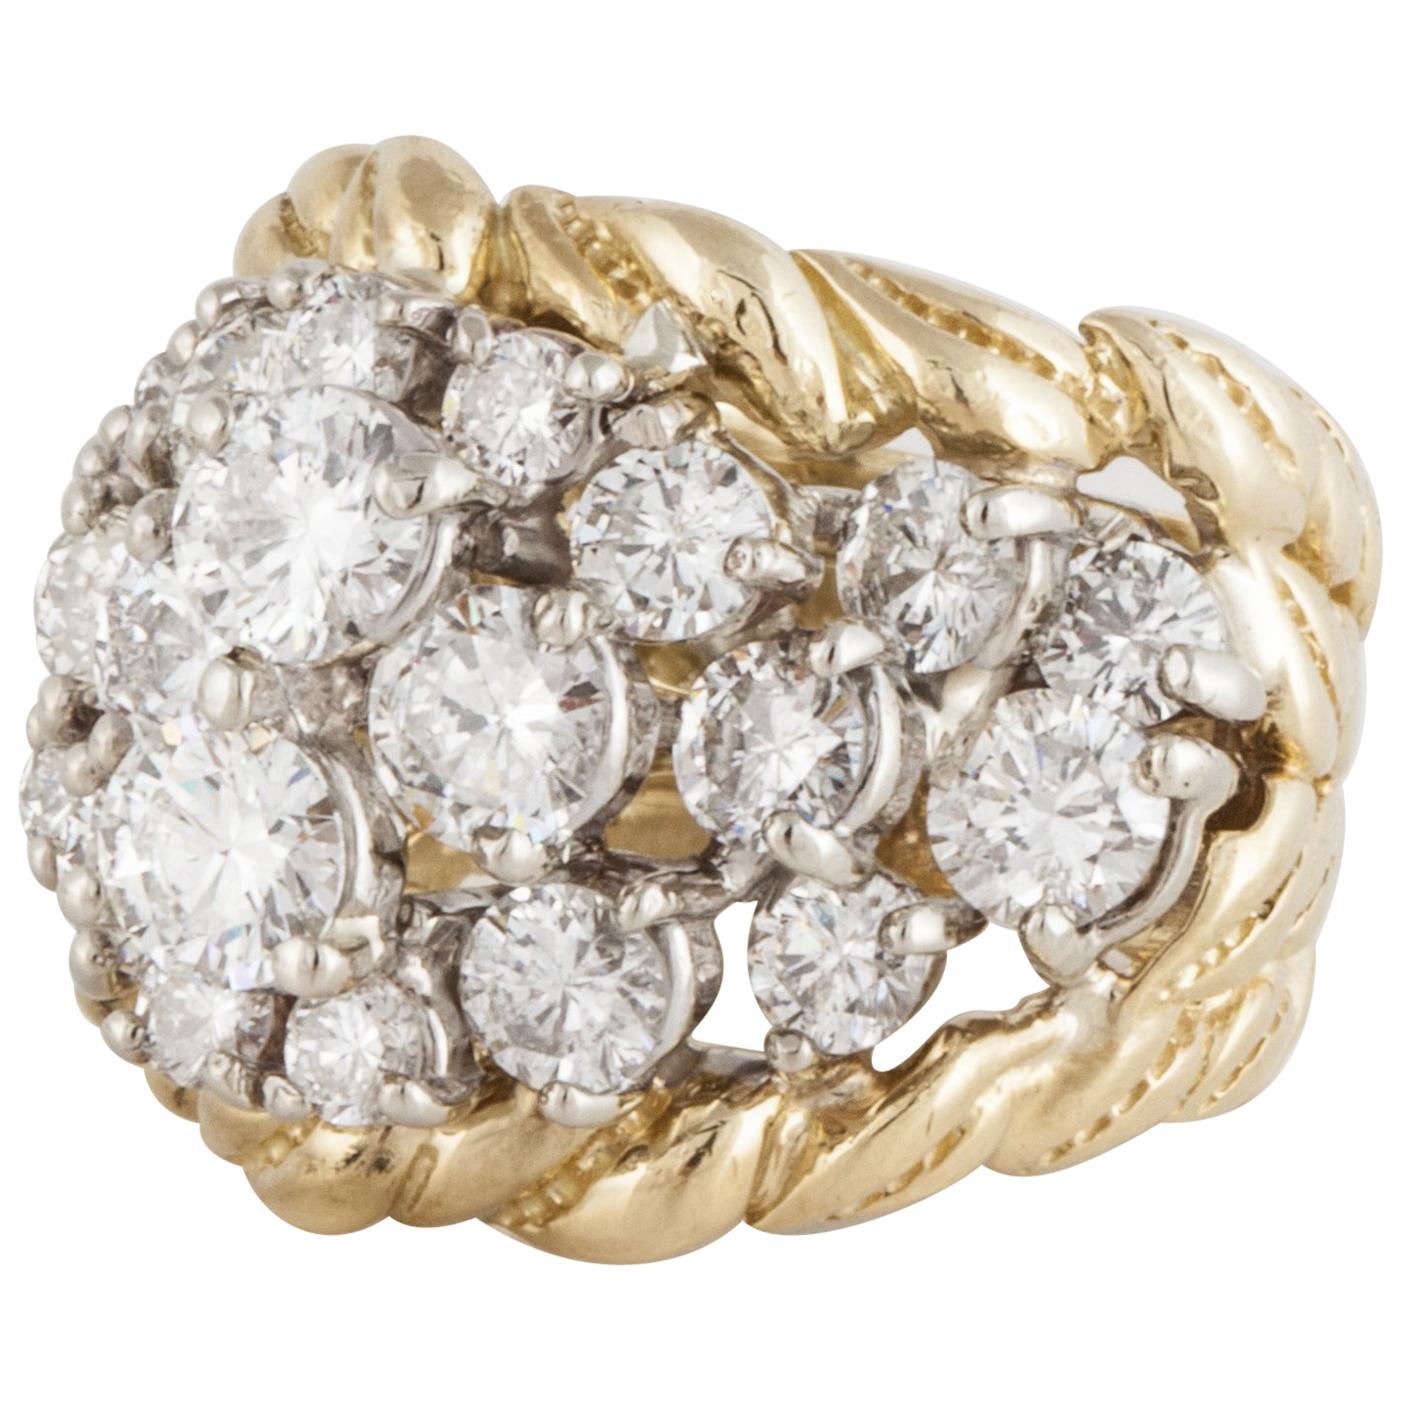 Jose Hess ring composed of 18K yellow and white gold marked on the inside 